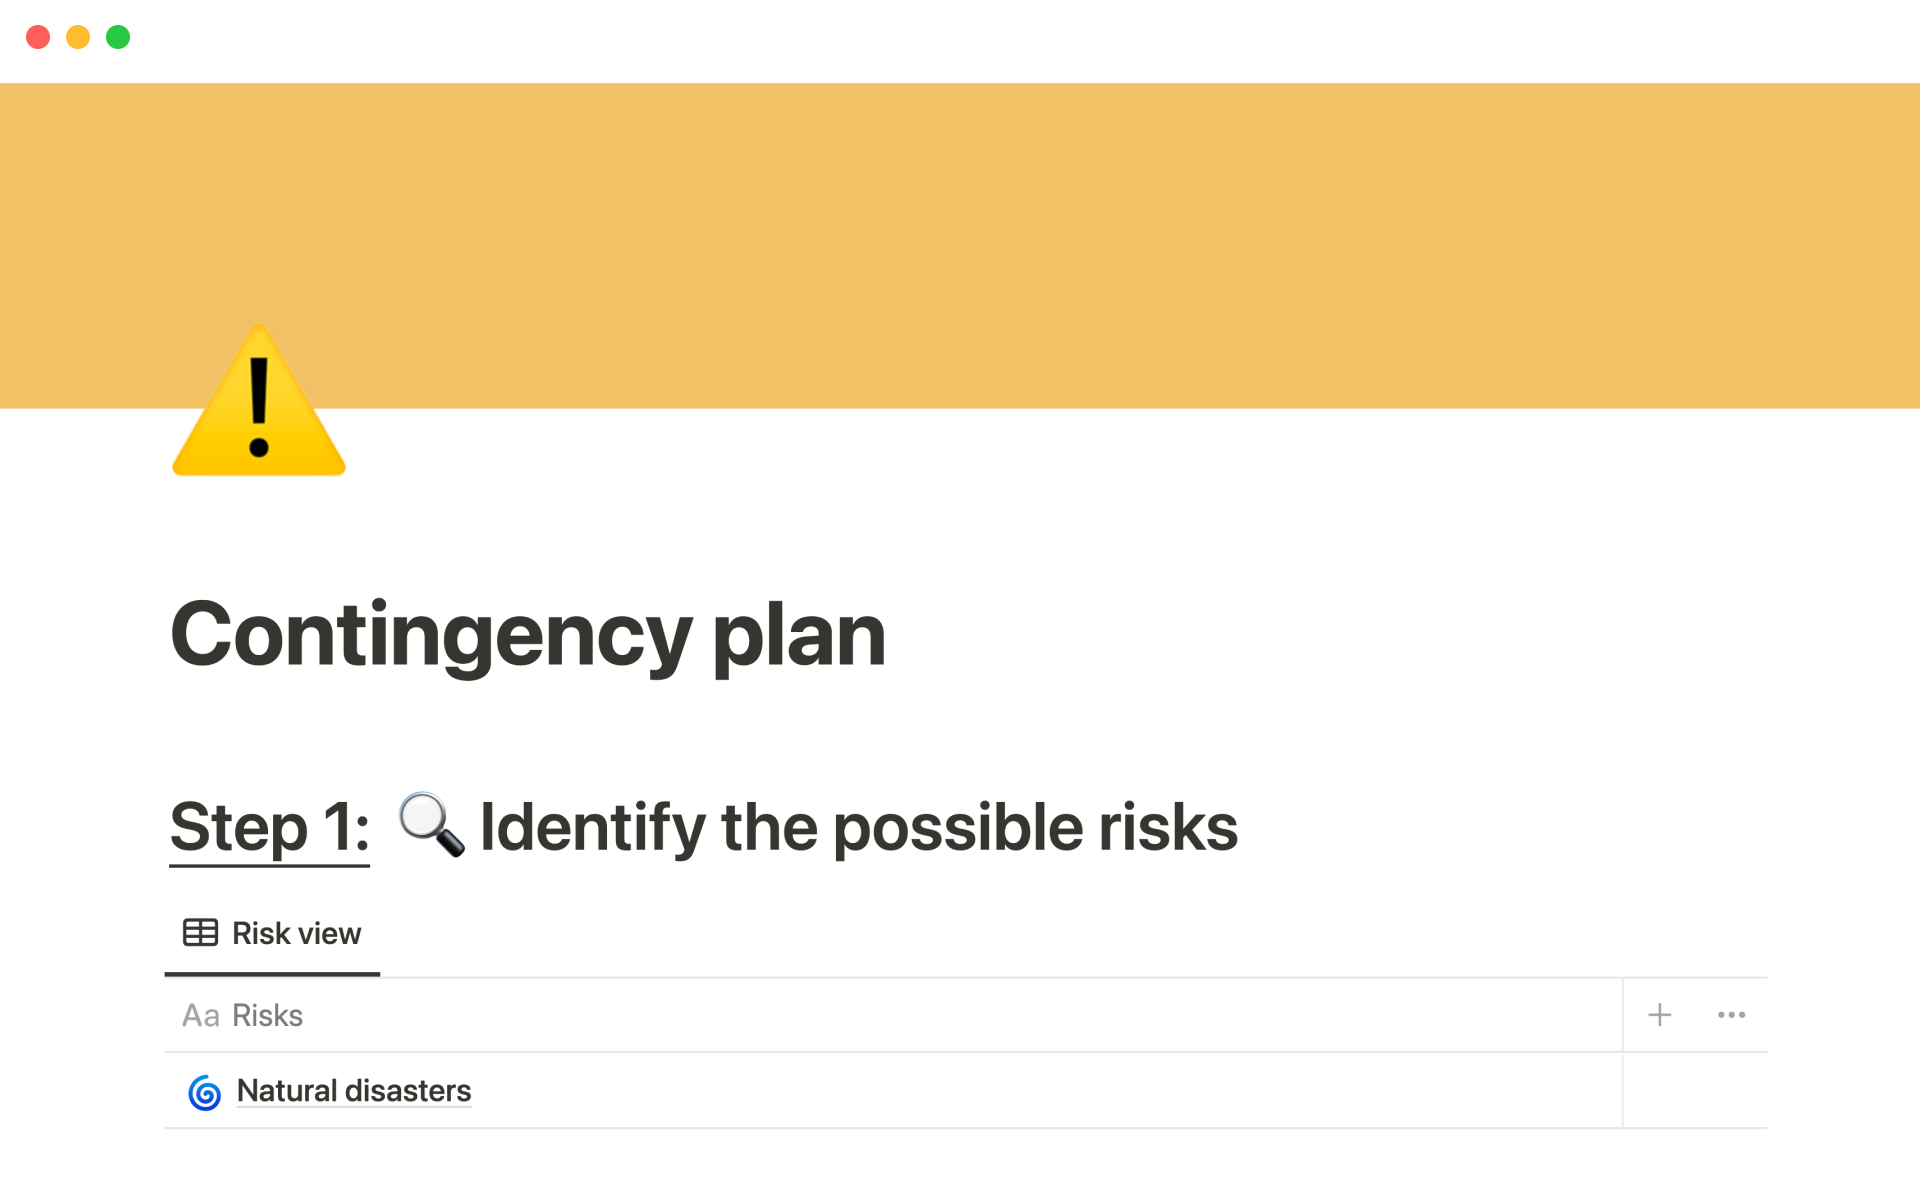 A contingency plan helps companies prepare for unexpected events and minimize their impacts.